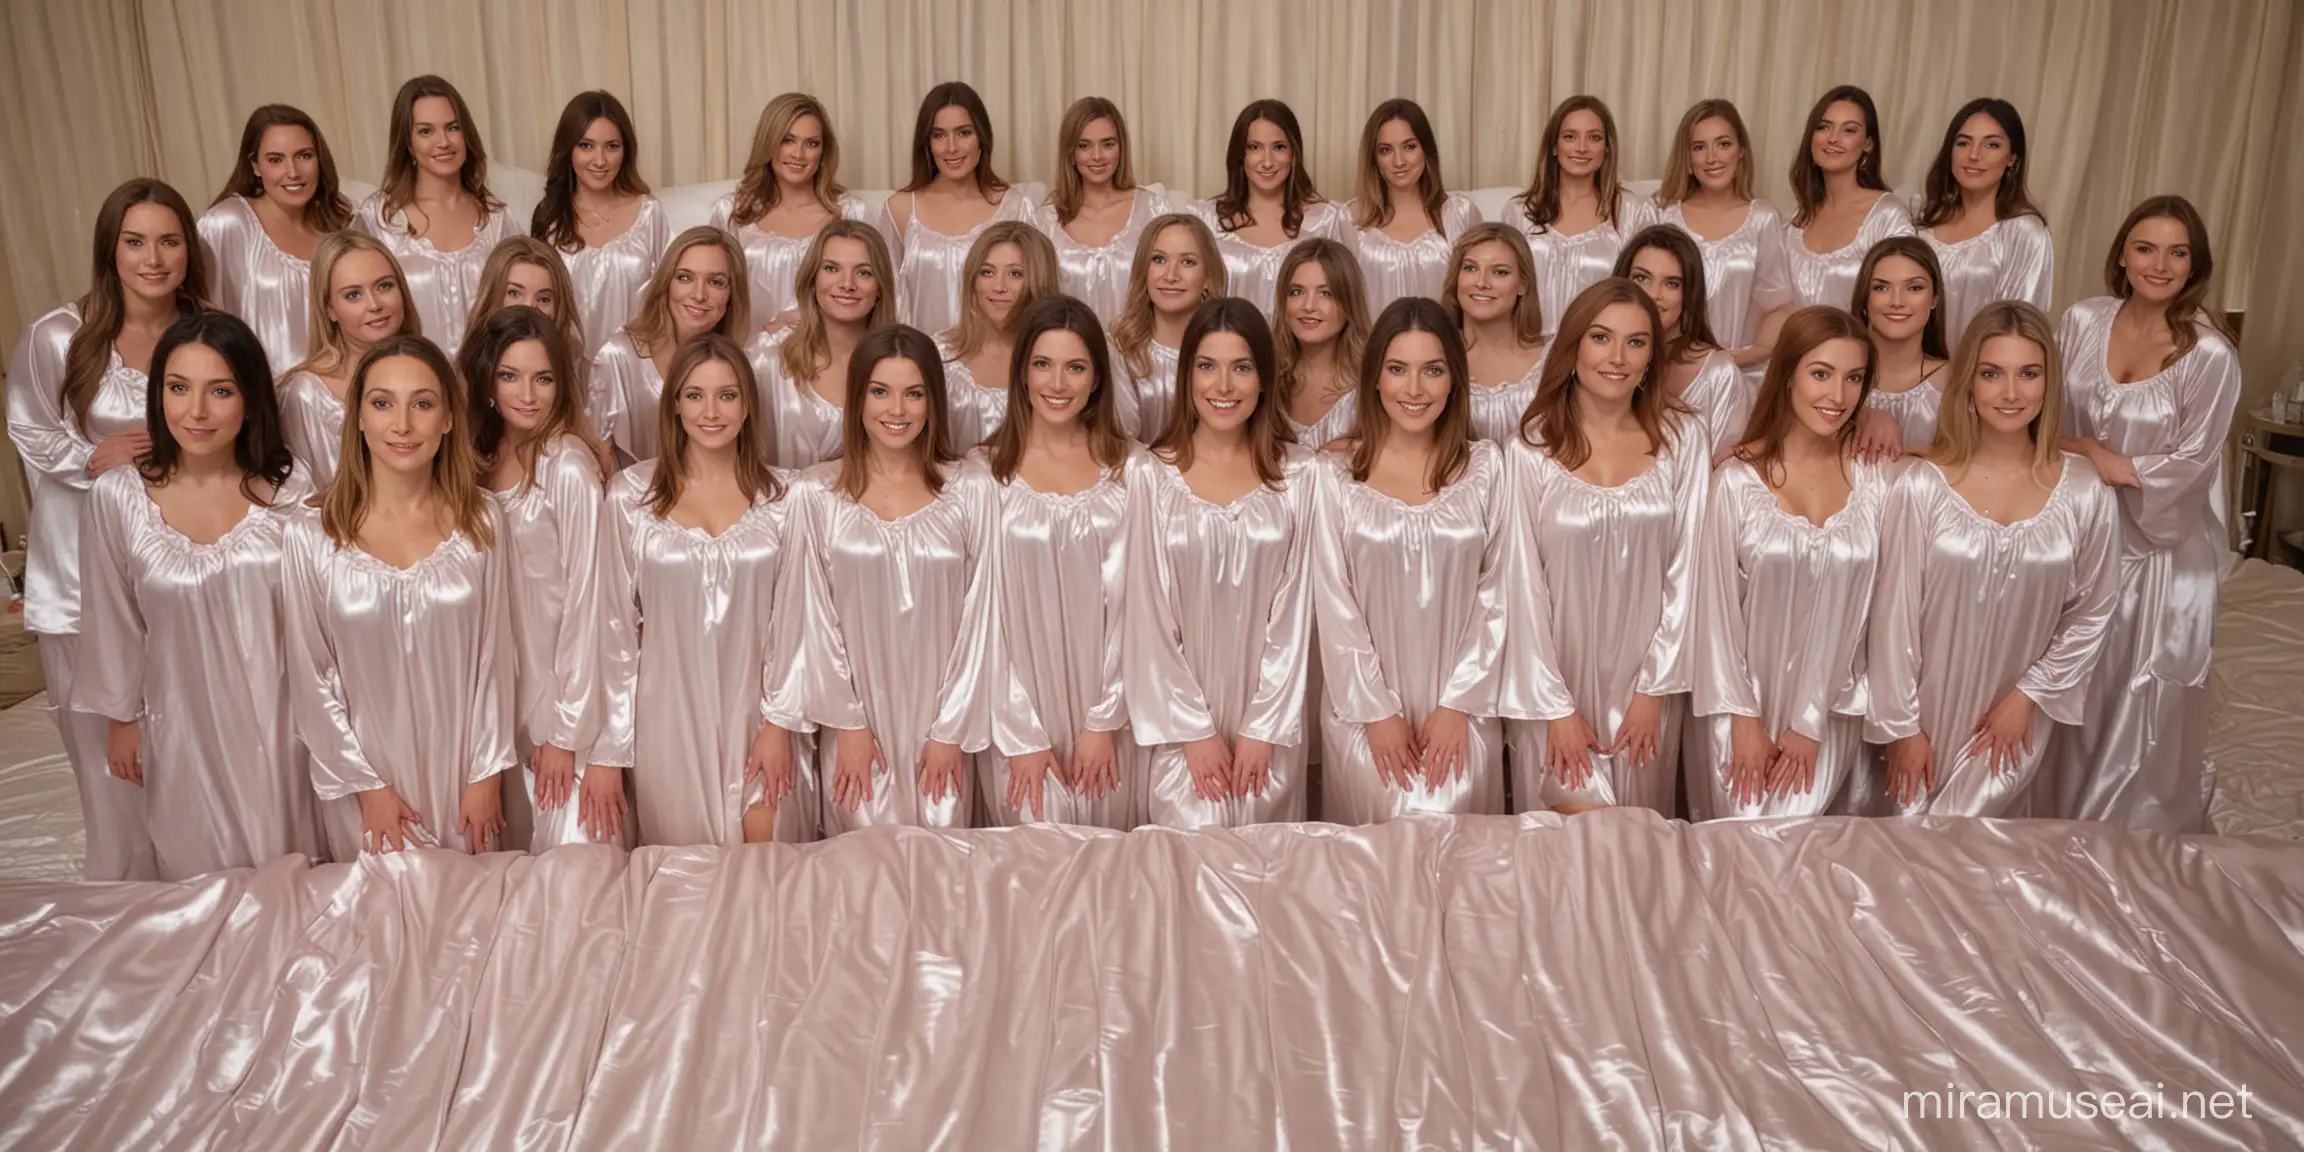 30 women in  milky satin nightgowns stand in 10 rows on a giant satin bed and look at you